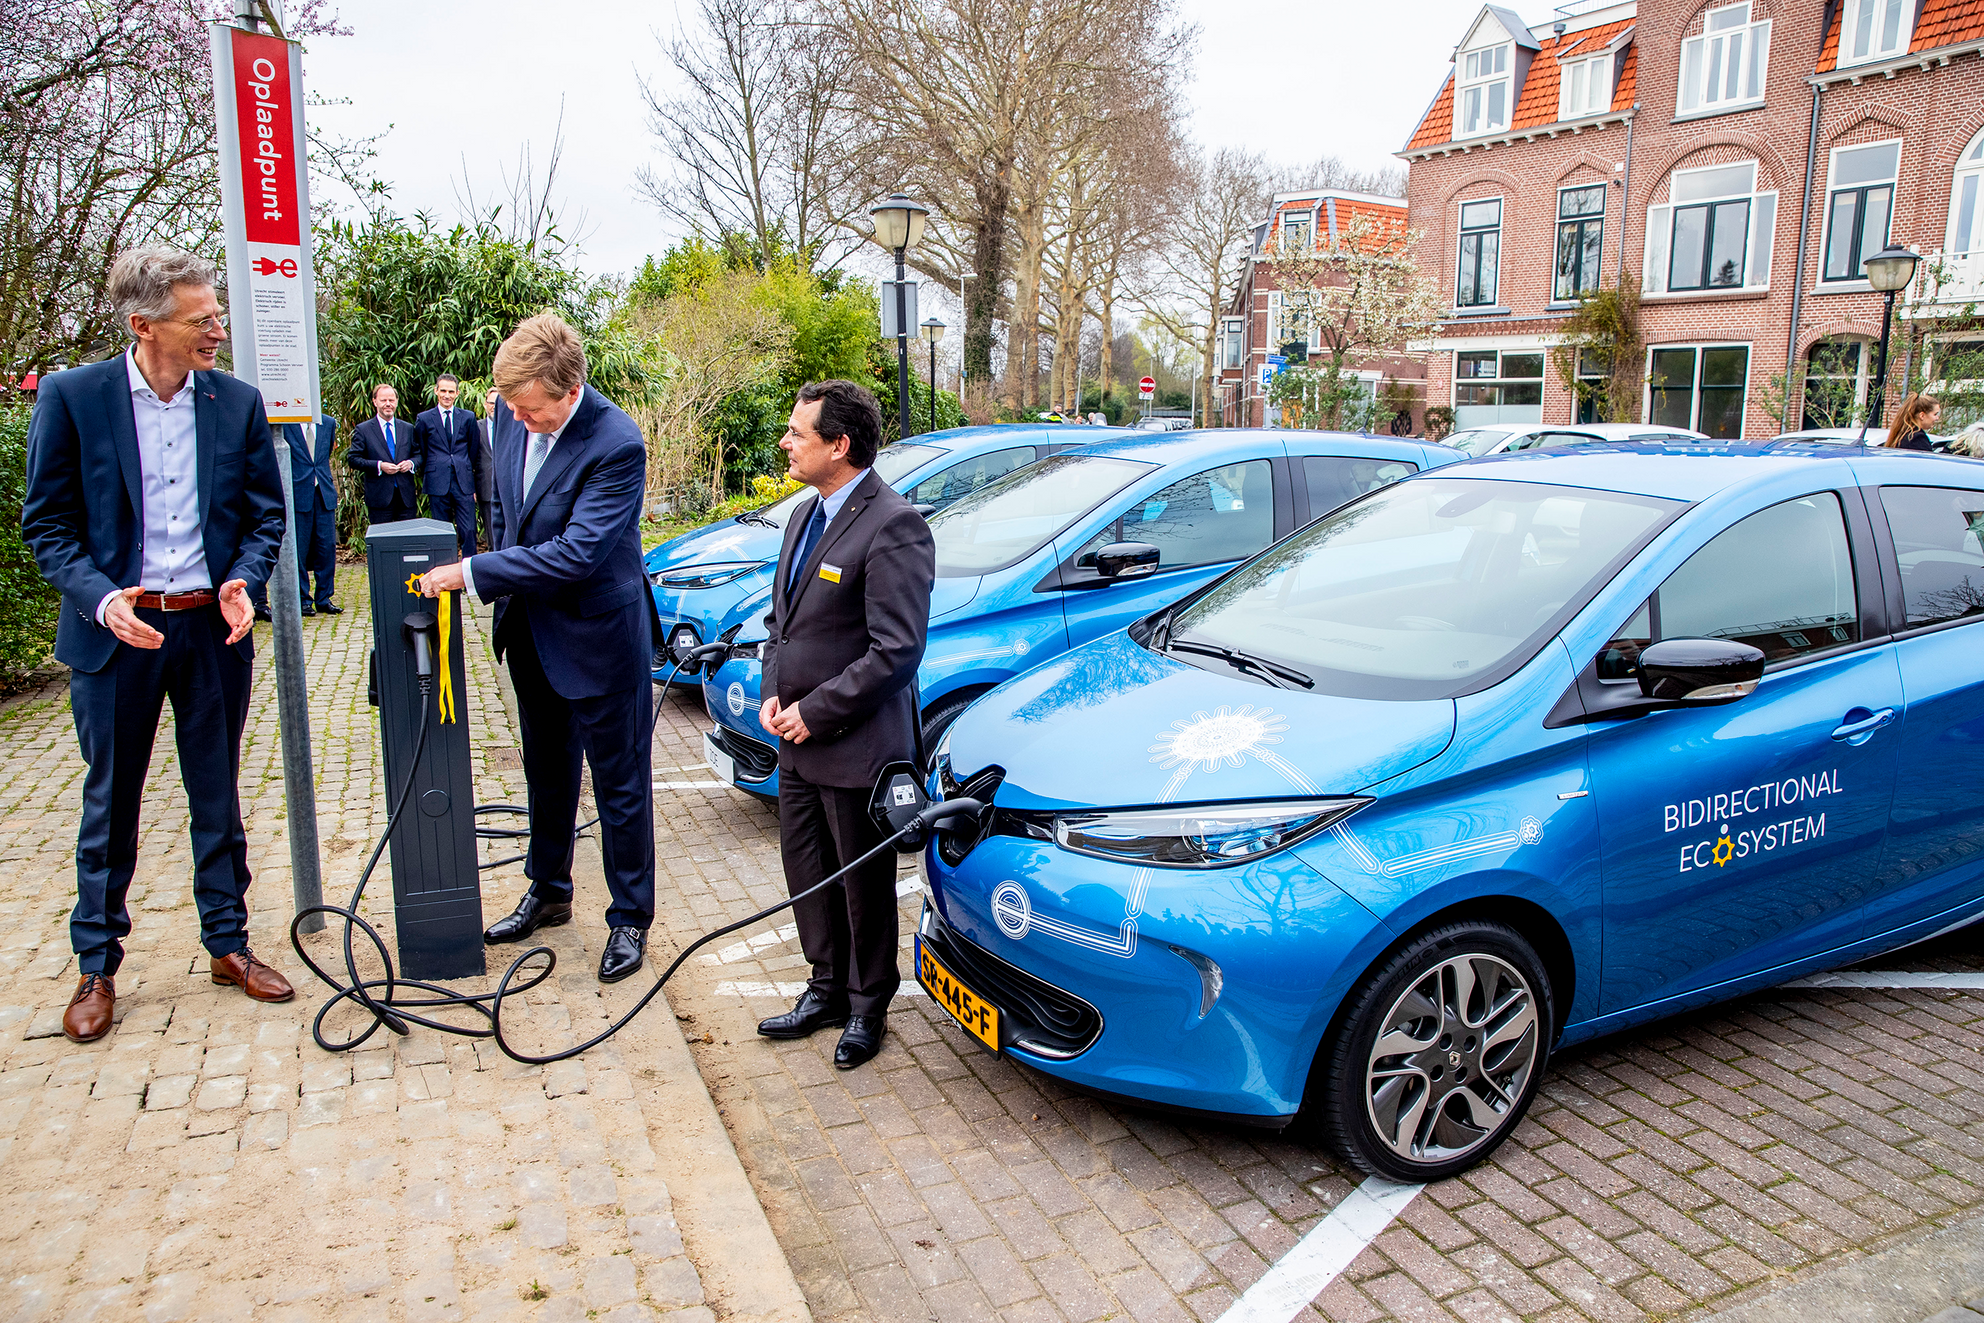 This image shows three men in suits standing next to a charging station that is charging a blue electric car with the words \u201cBidirectional Ecosystem\u201d written on the door.